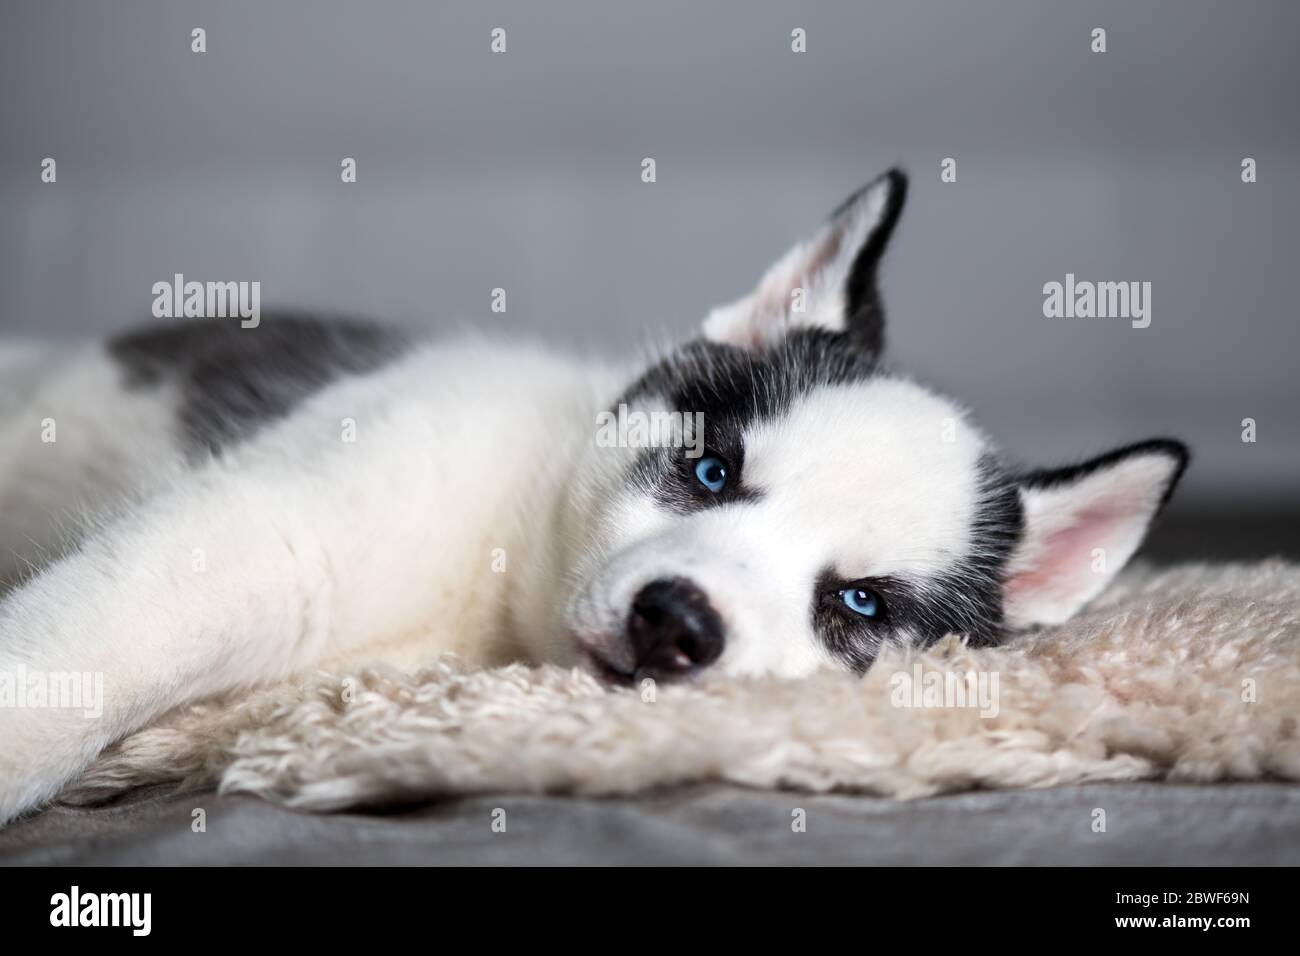 A small white dog puppy breed siberian husky with beautiful blue eyes lays on white carpet. Dogs and pet photography Stock Photo